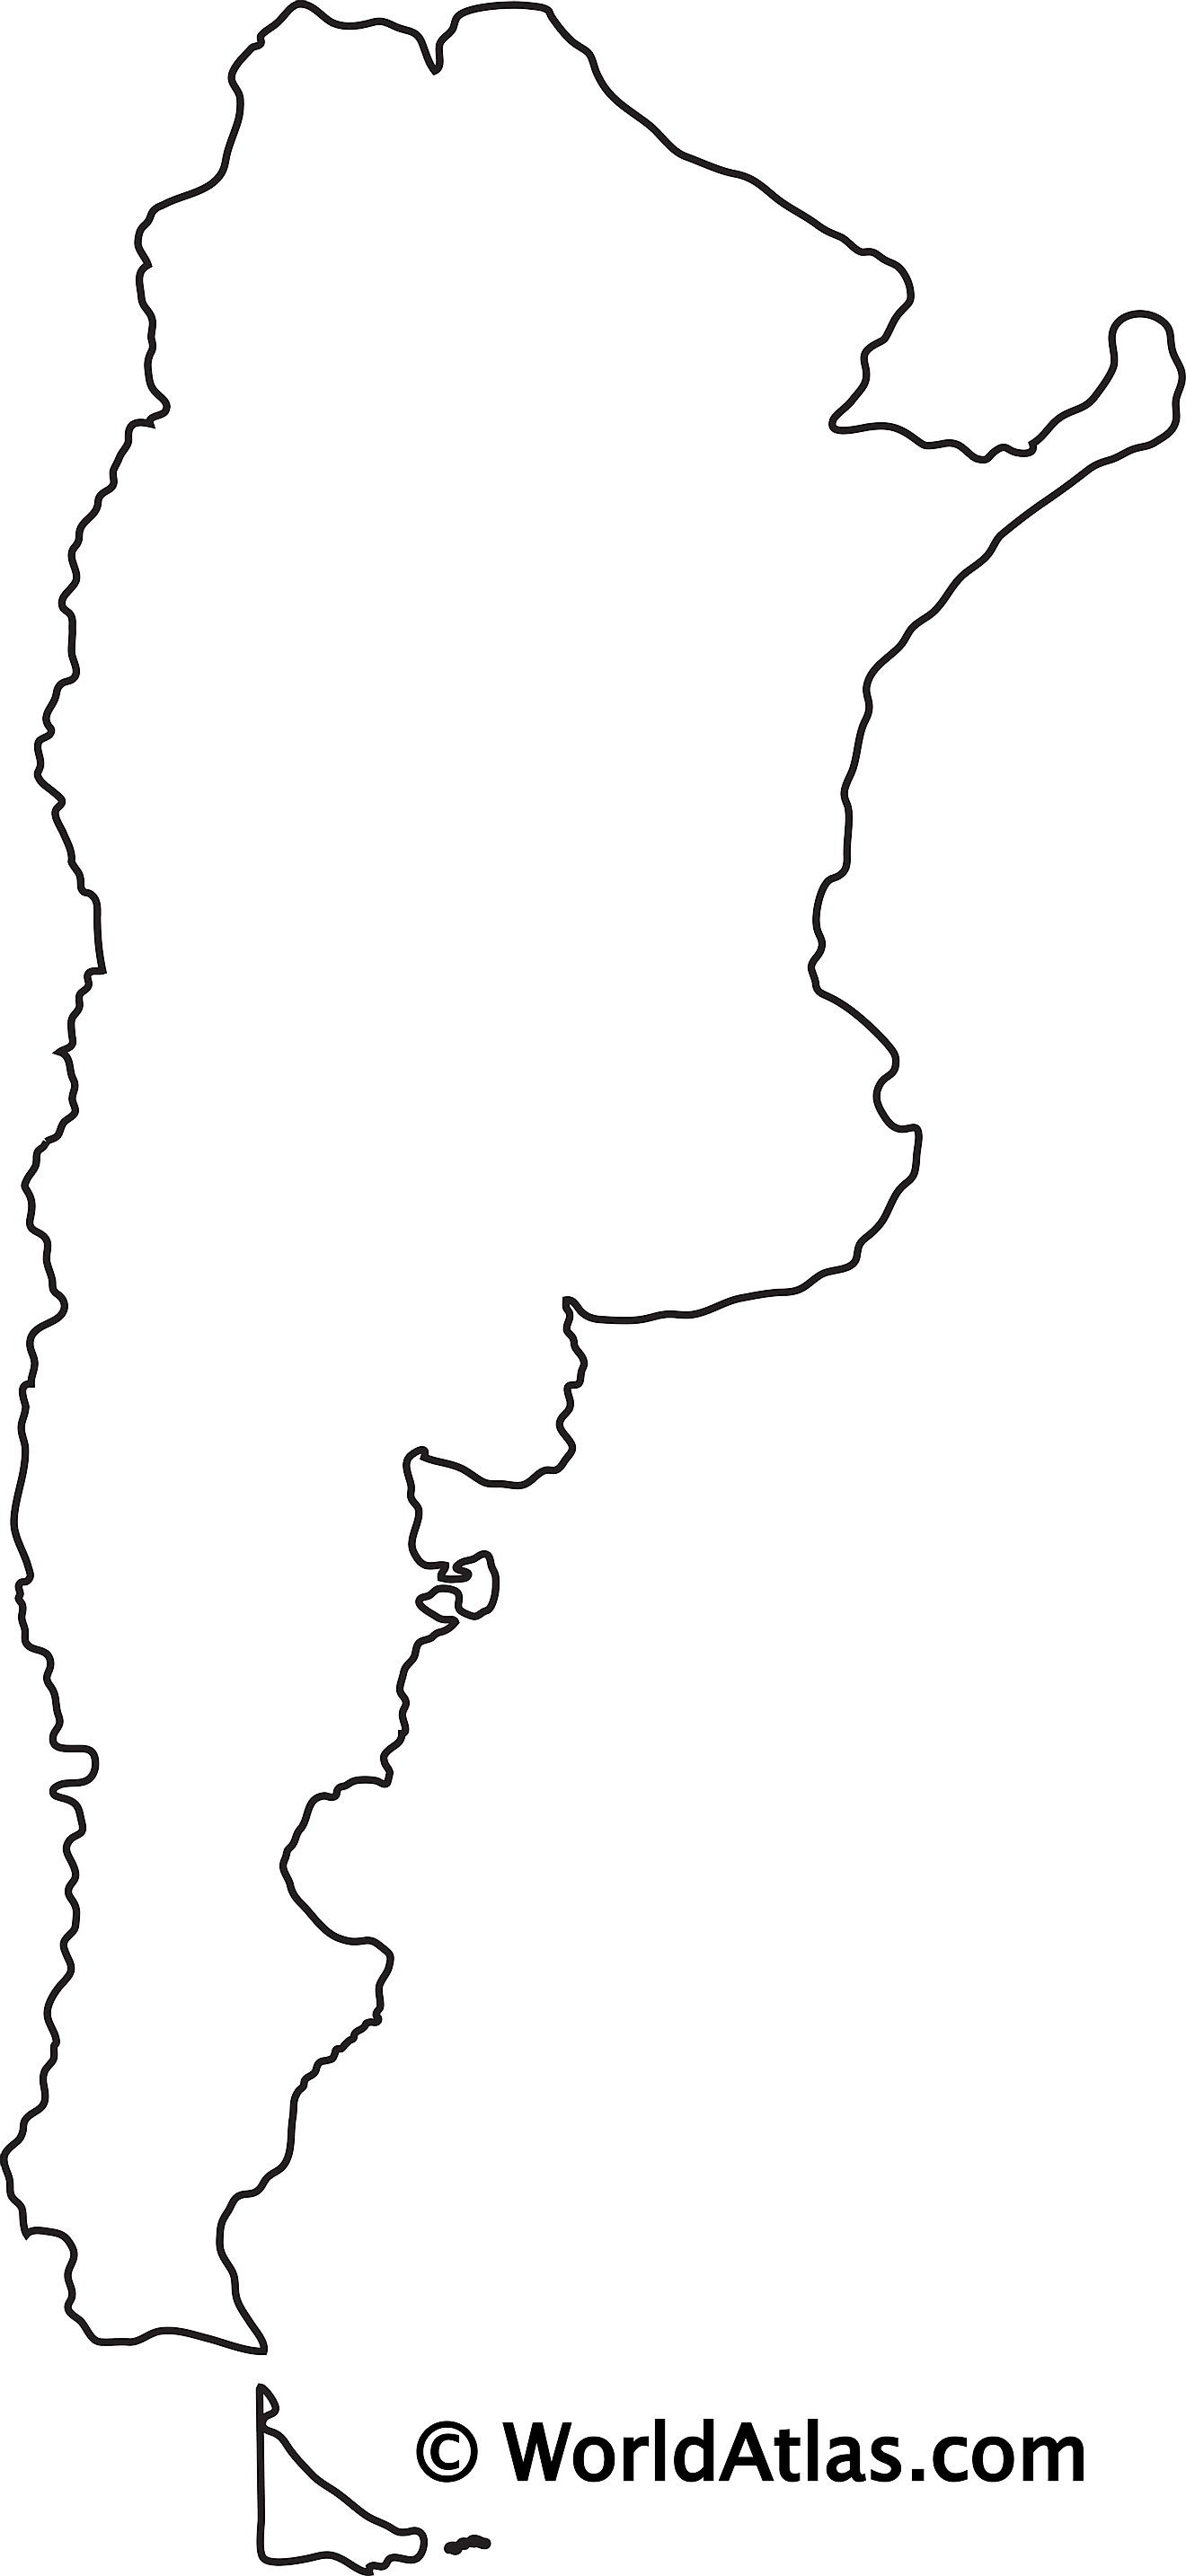 Blank outline map of Argentina